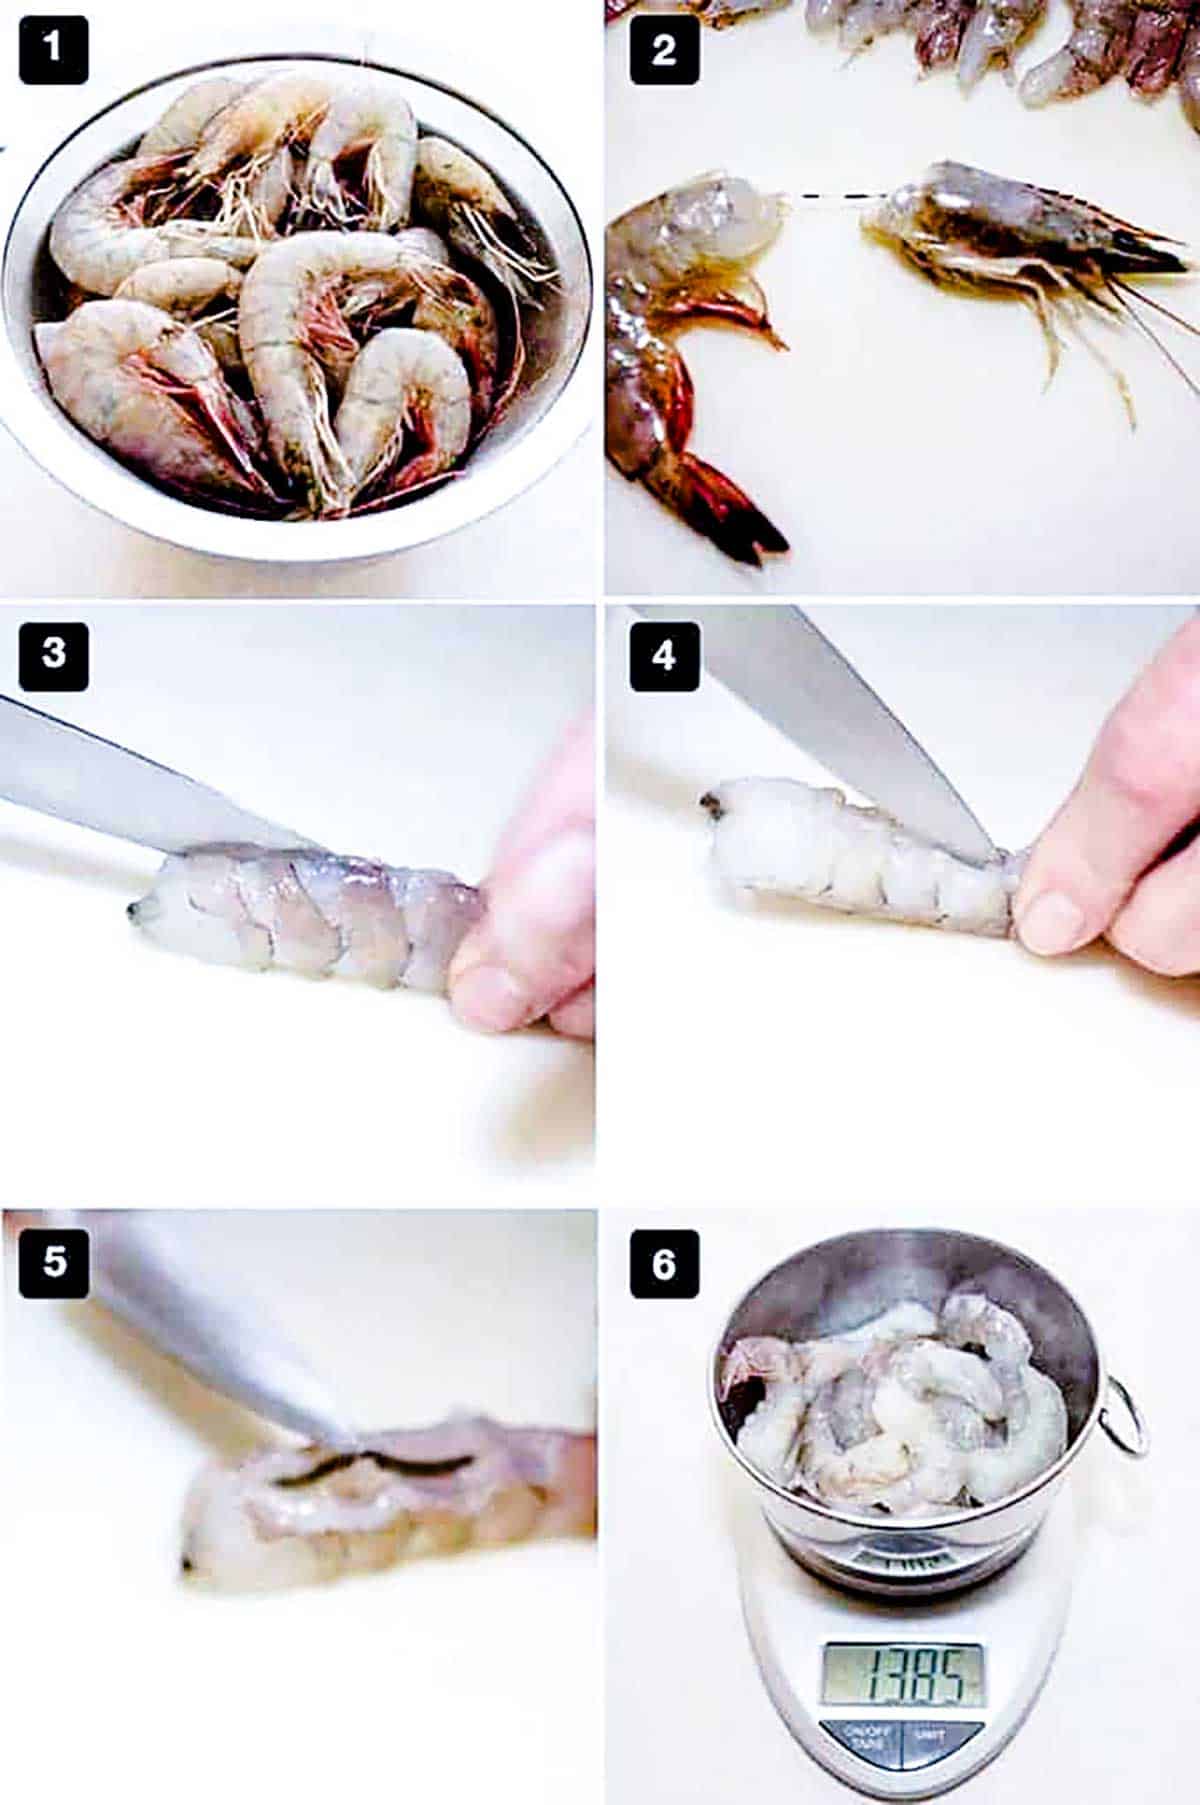 Cleaning the shrimp.